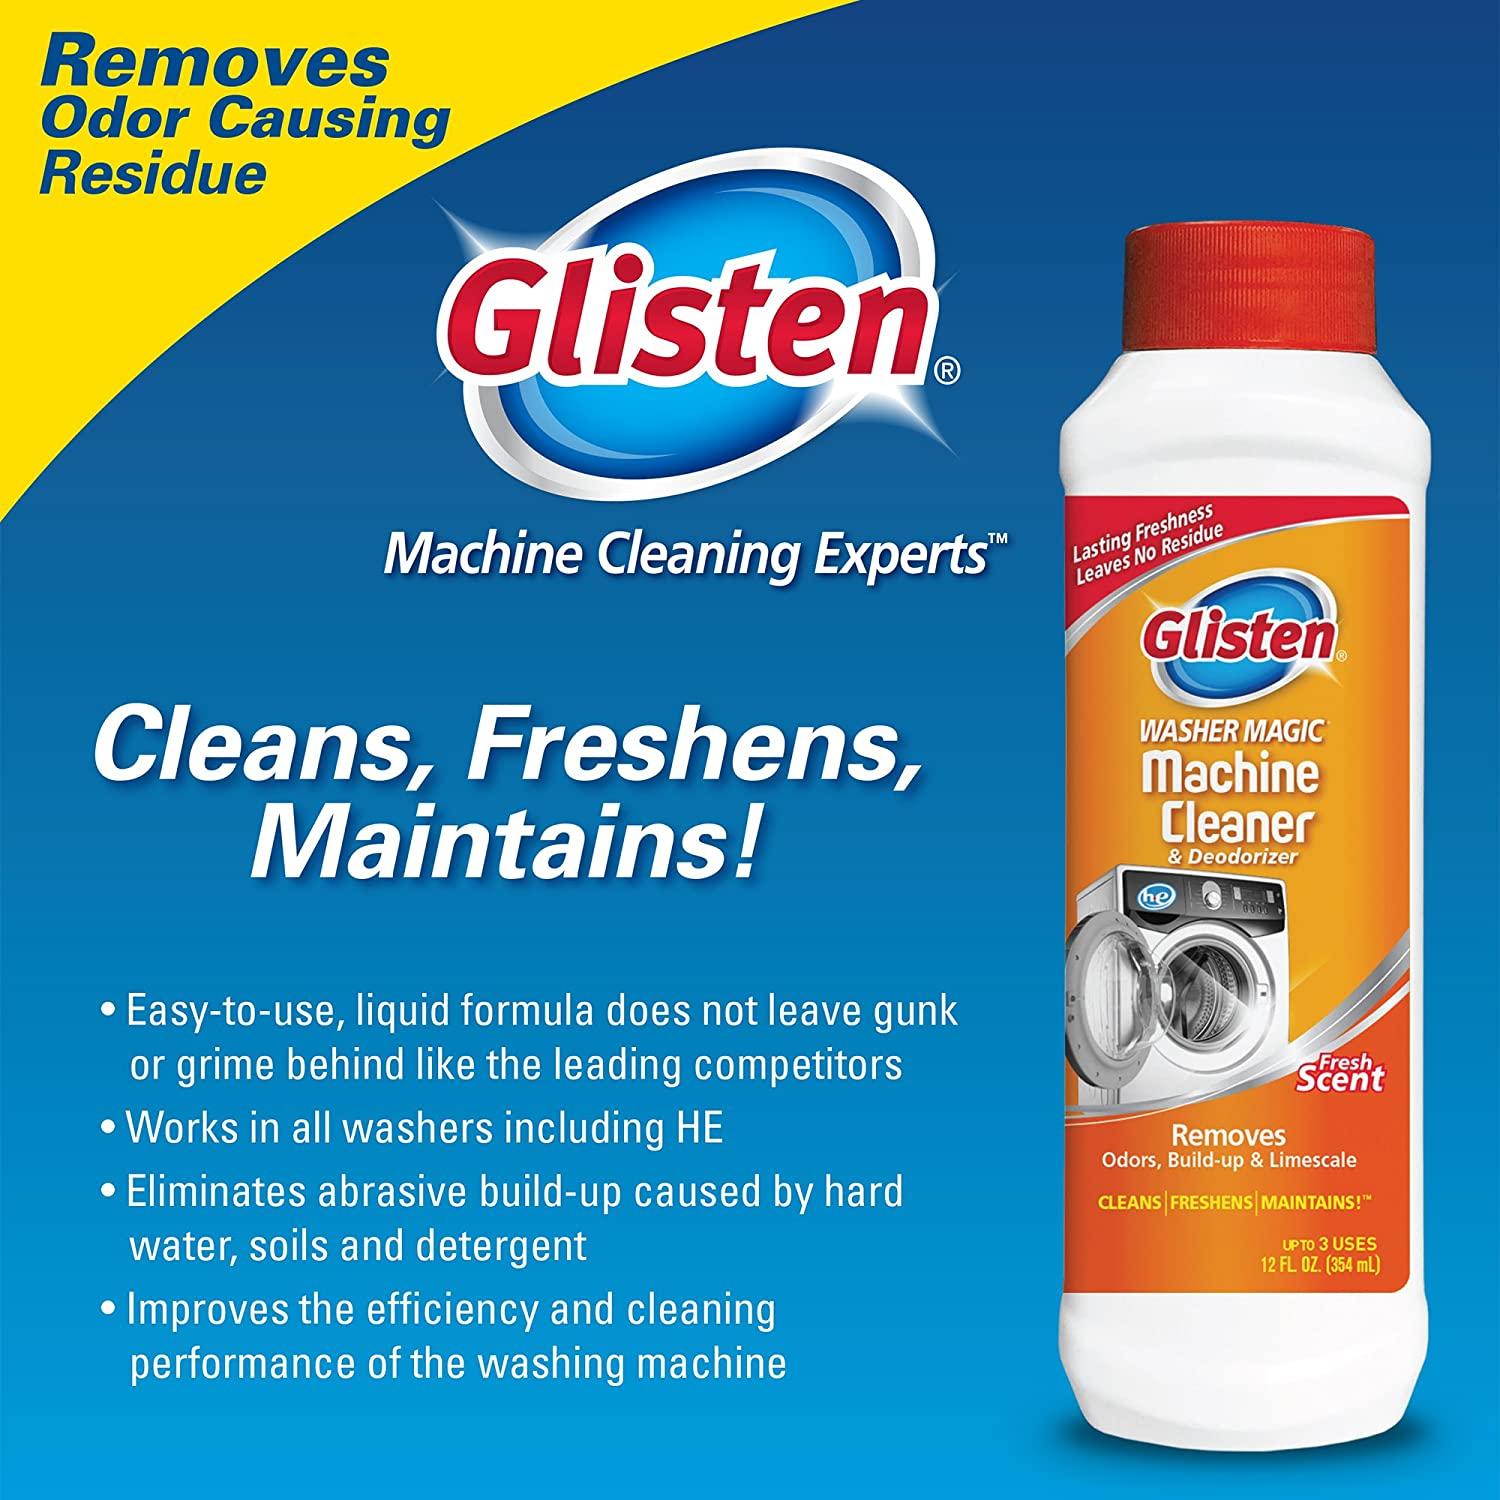 Glisten® Washing Machine Cleaner & Freshener leaves no residue behind and  effectively cleans door seals and detergent drawers, as well as…